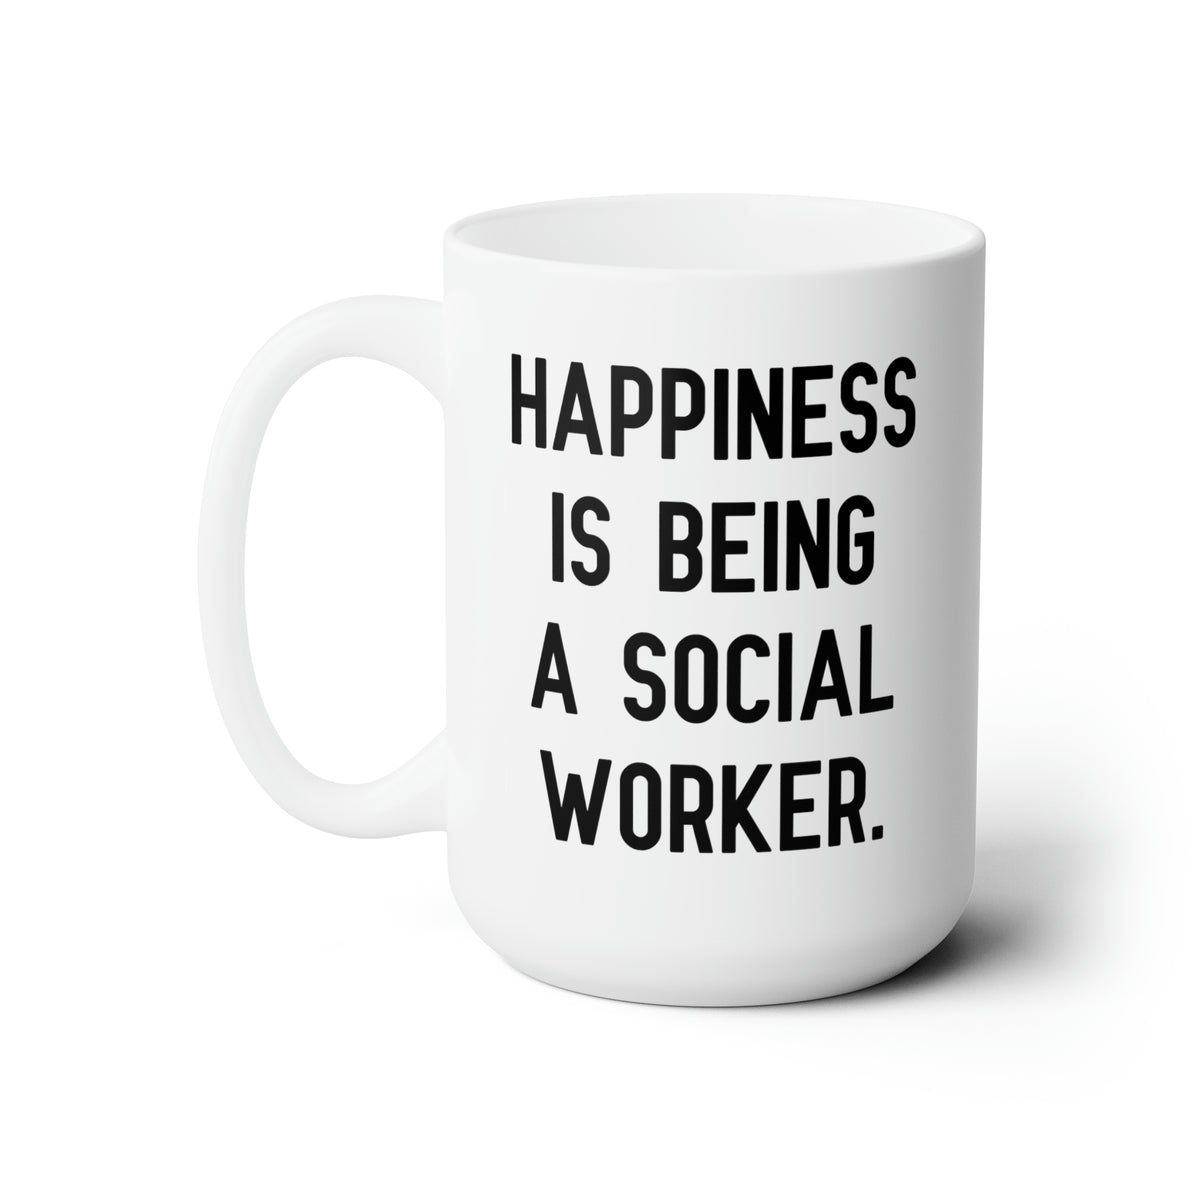 Special Social worker 11oz 15oz Mug, Happiness Is Being a Social Worker, Present For Coworkers, Cute Gifts From Friends, Friends TV show, Mugs, Oz mugs, Oz mugs, Coffee mugs, Tea mugs